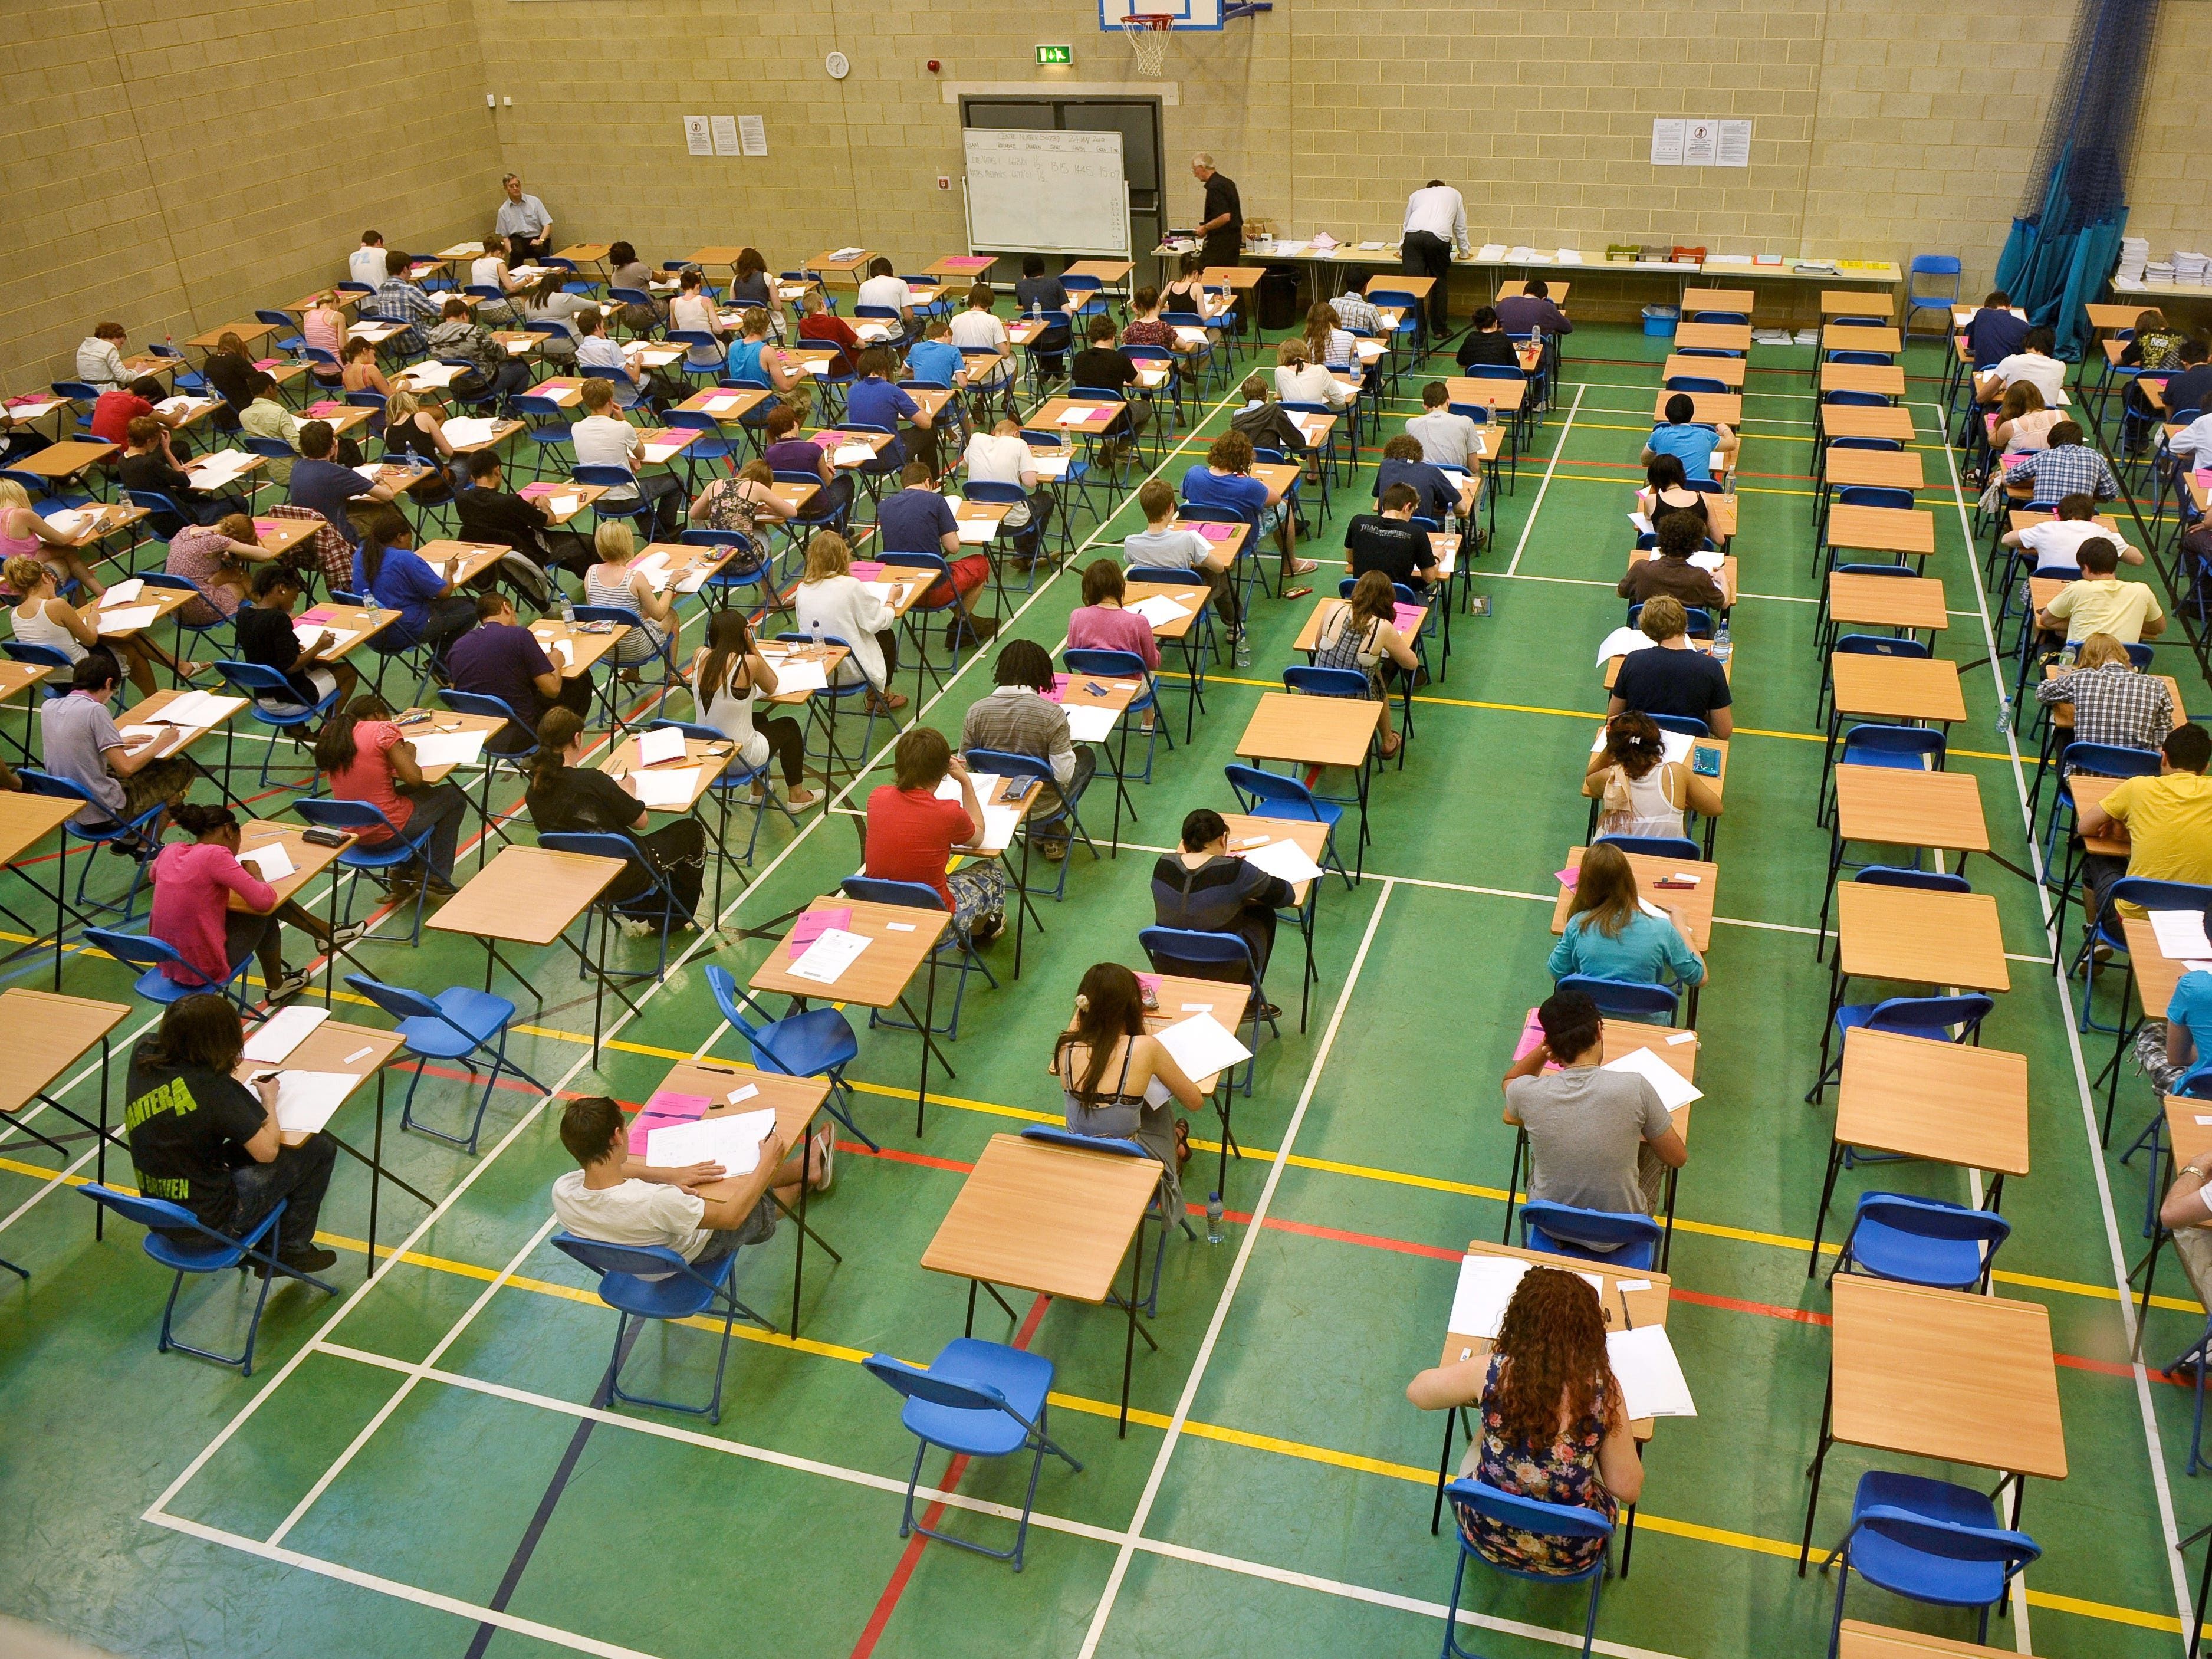 Students waiting for A-level results urged to plan ahead and explore all options